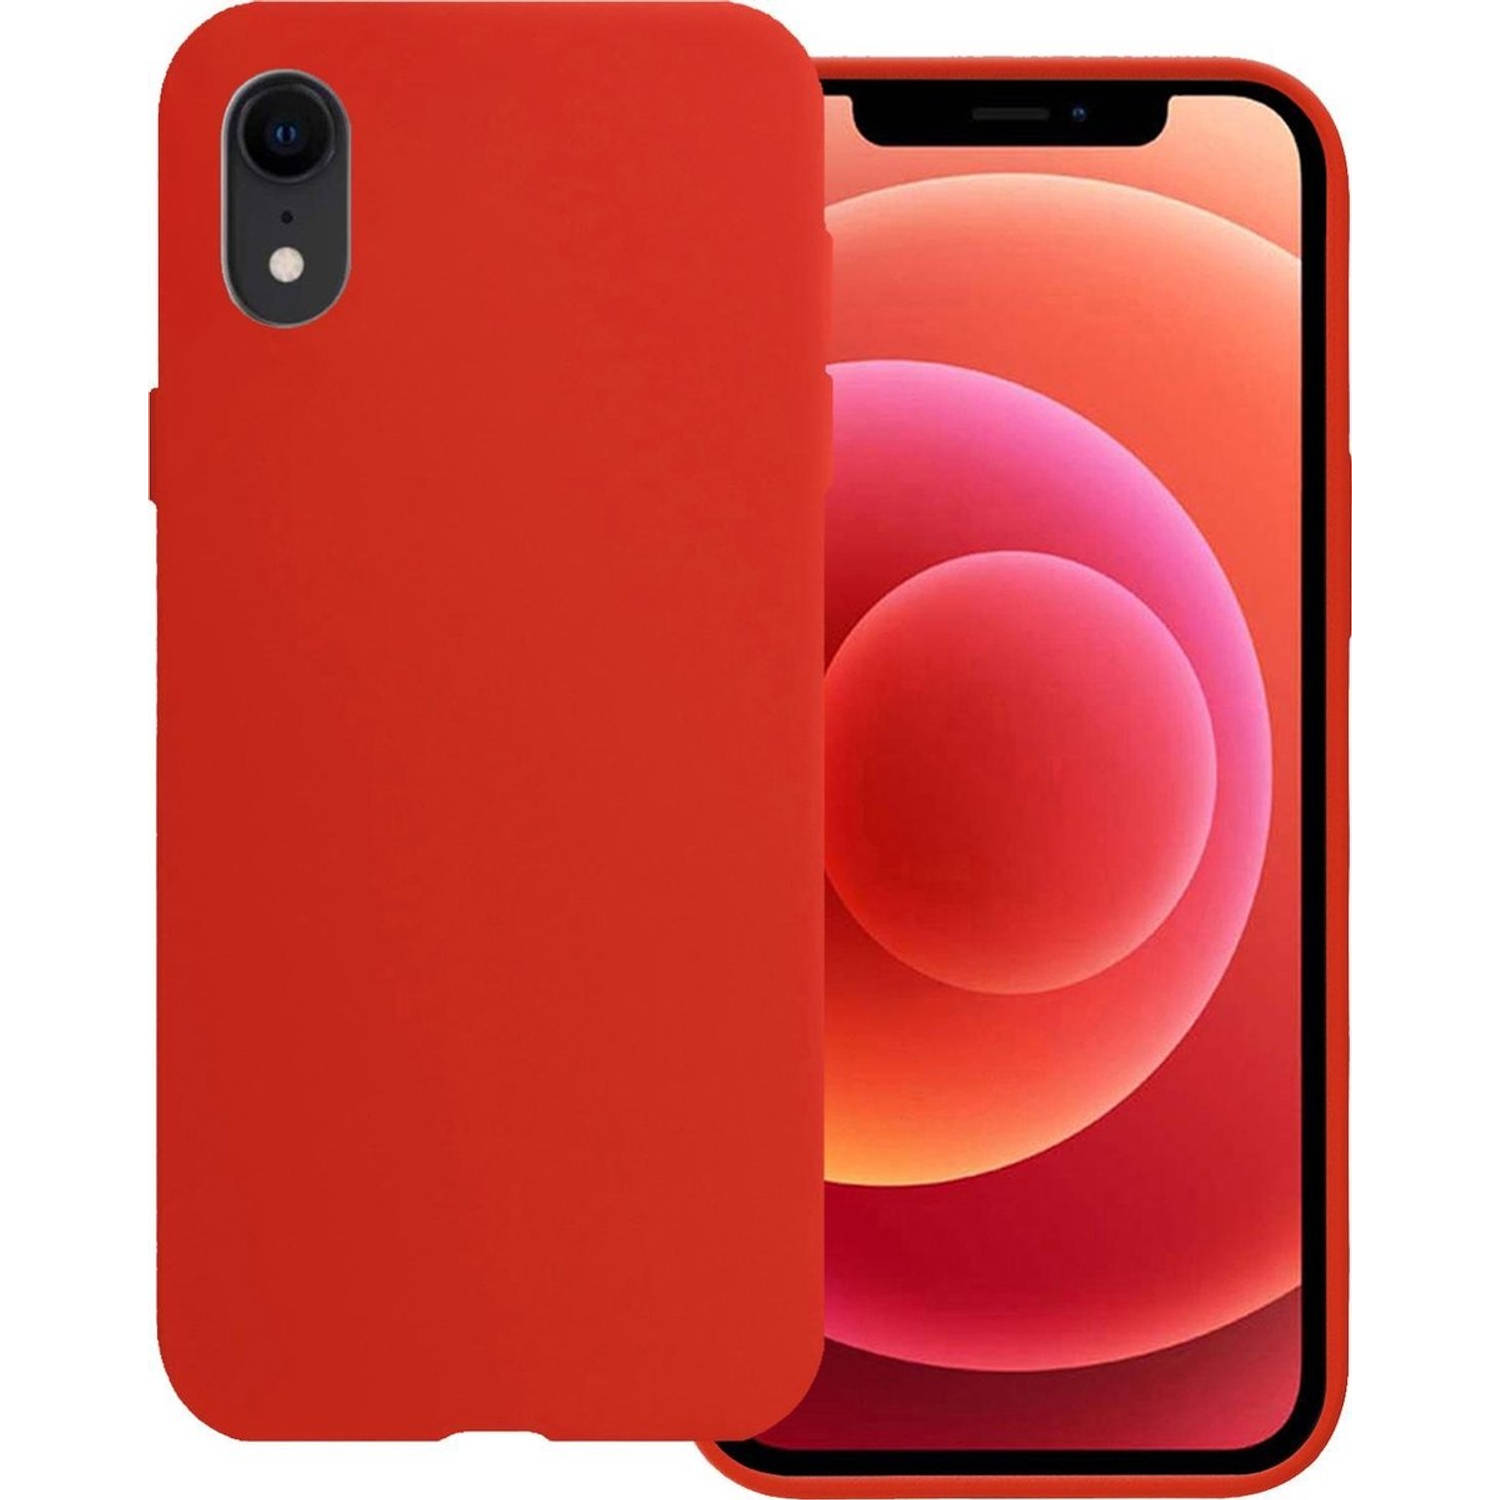 Basey Apple Iphone Xr Hoesje Siliconen Hoes Case Cover Apple Iphone Xr-rood